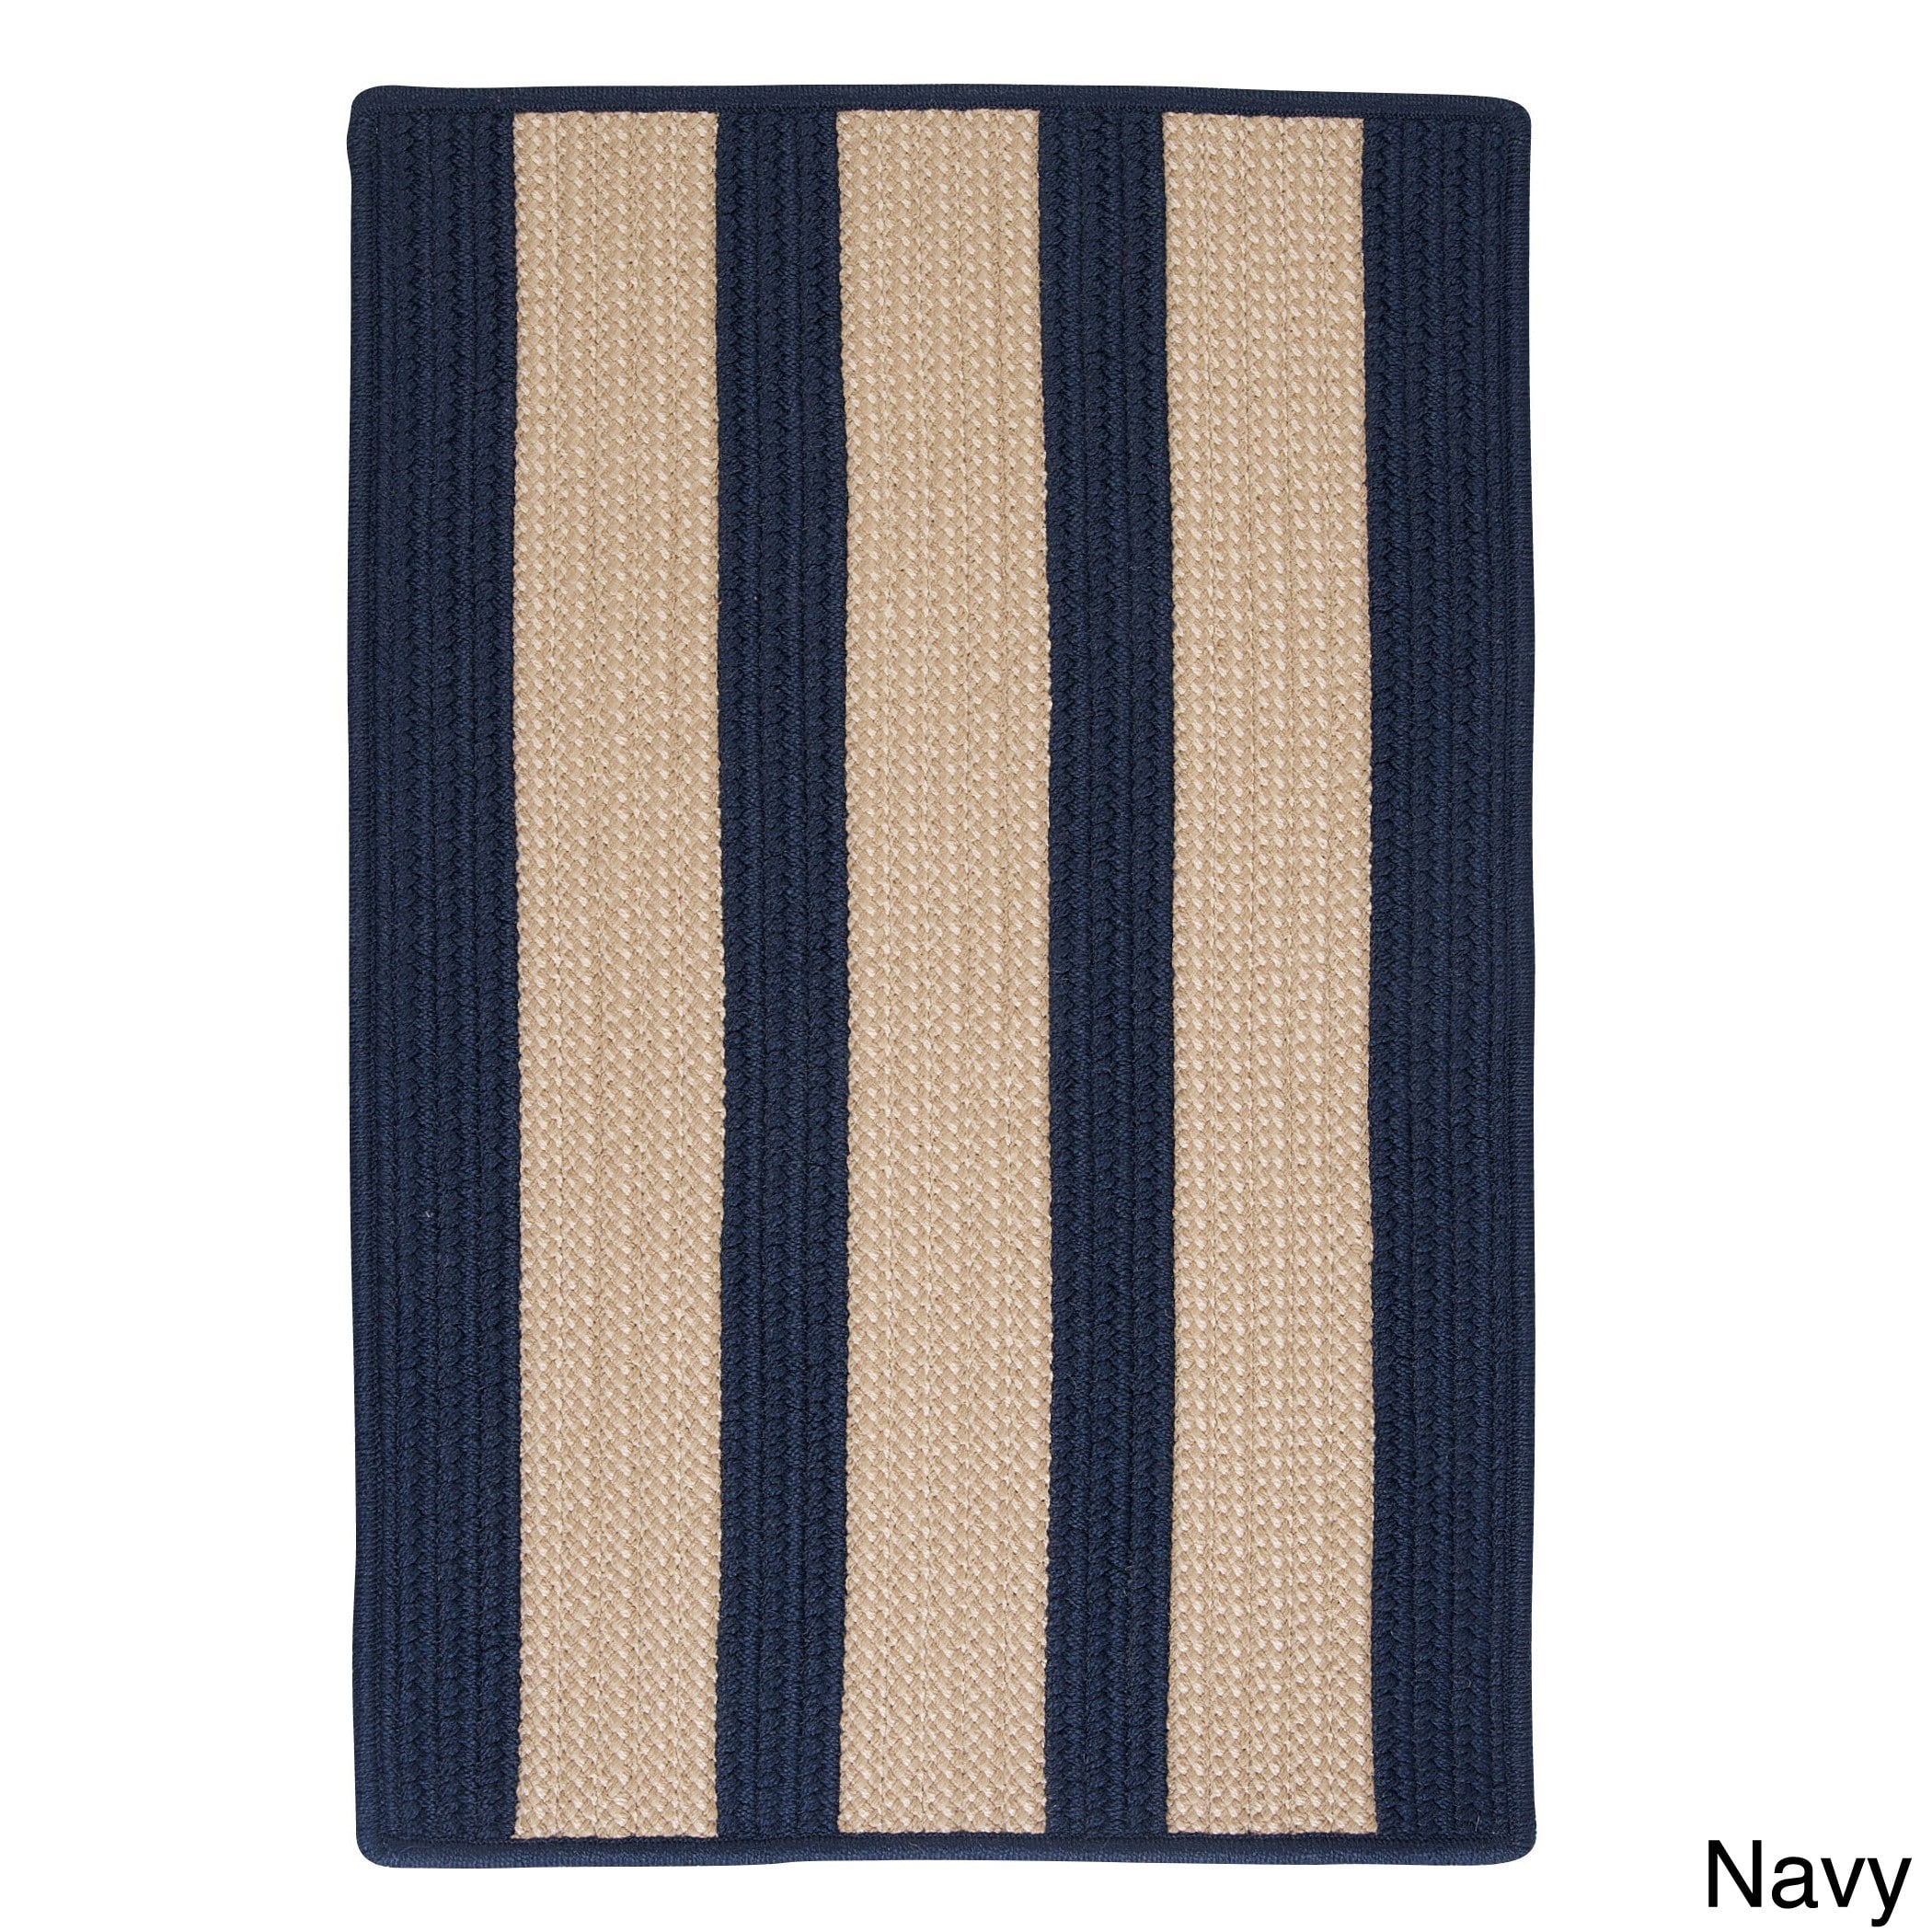 Light House Natural Stripe Reversible Outdoor Rug (8 X 10)